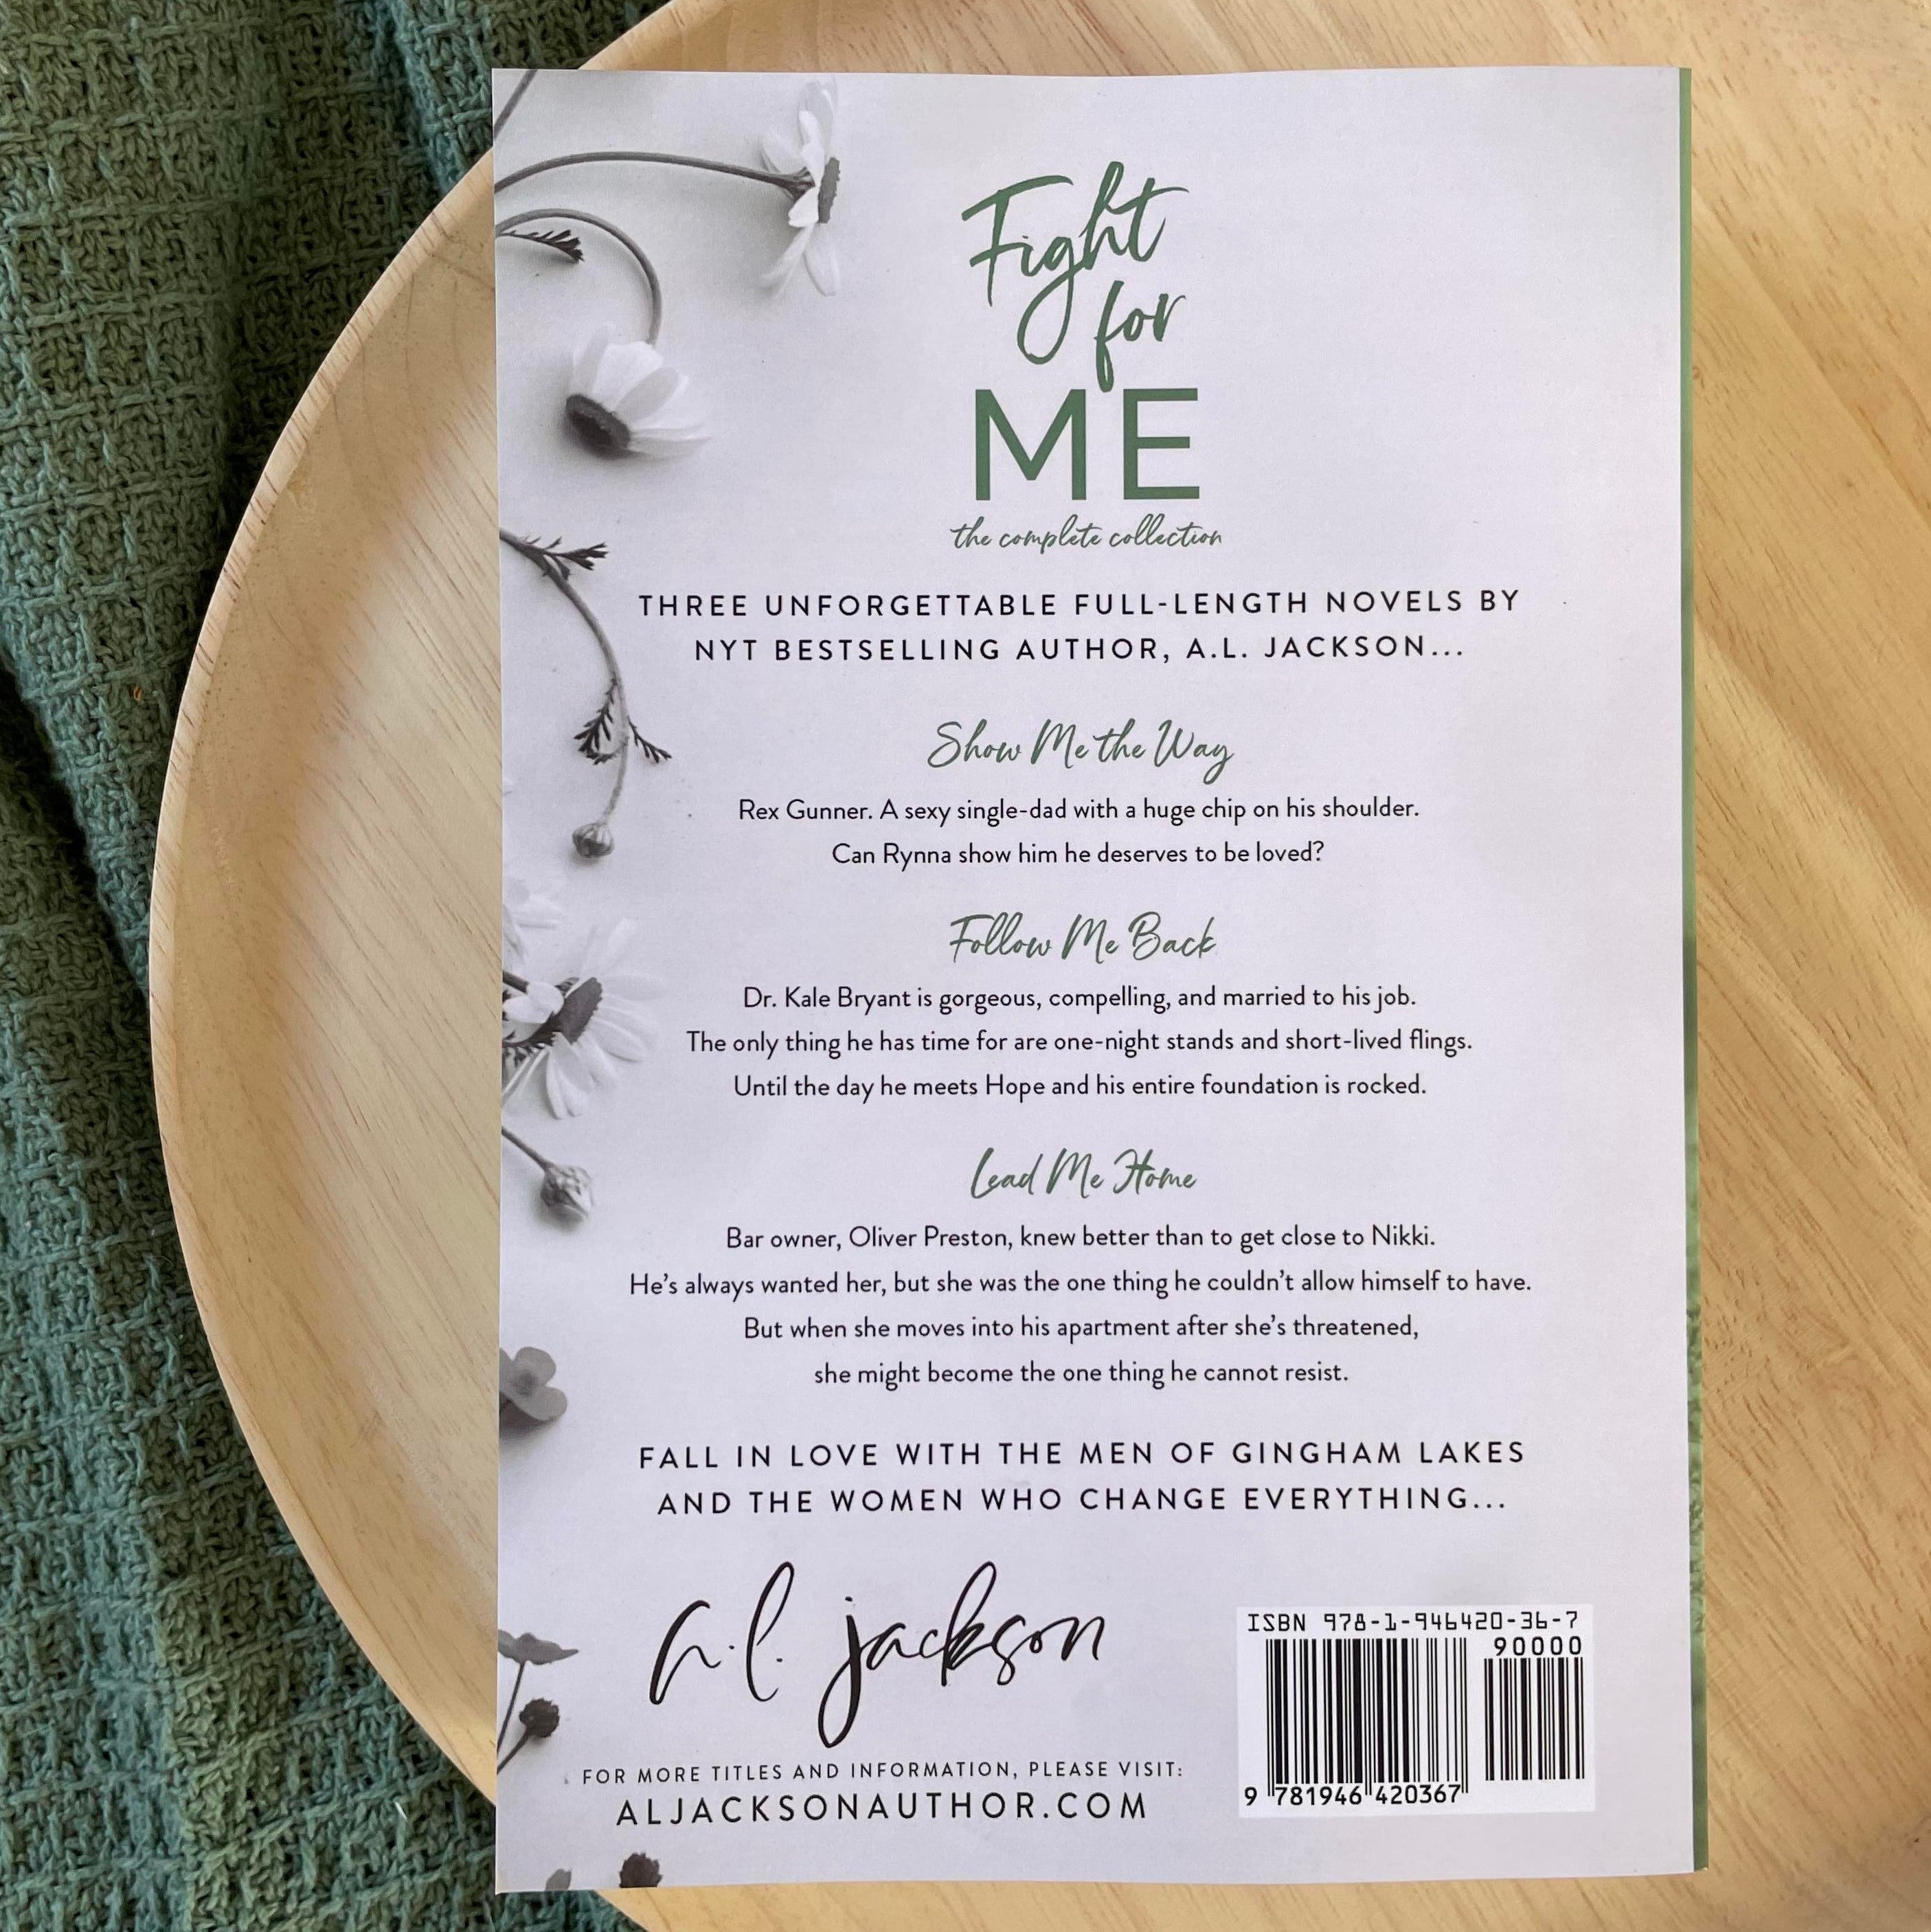 Fight For Me by A. L. Jackson